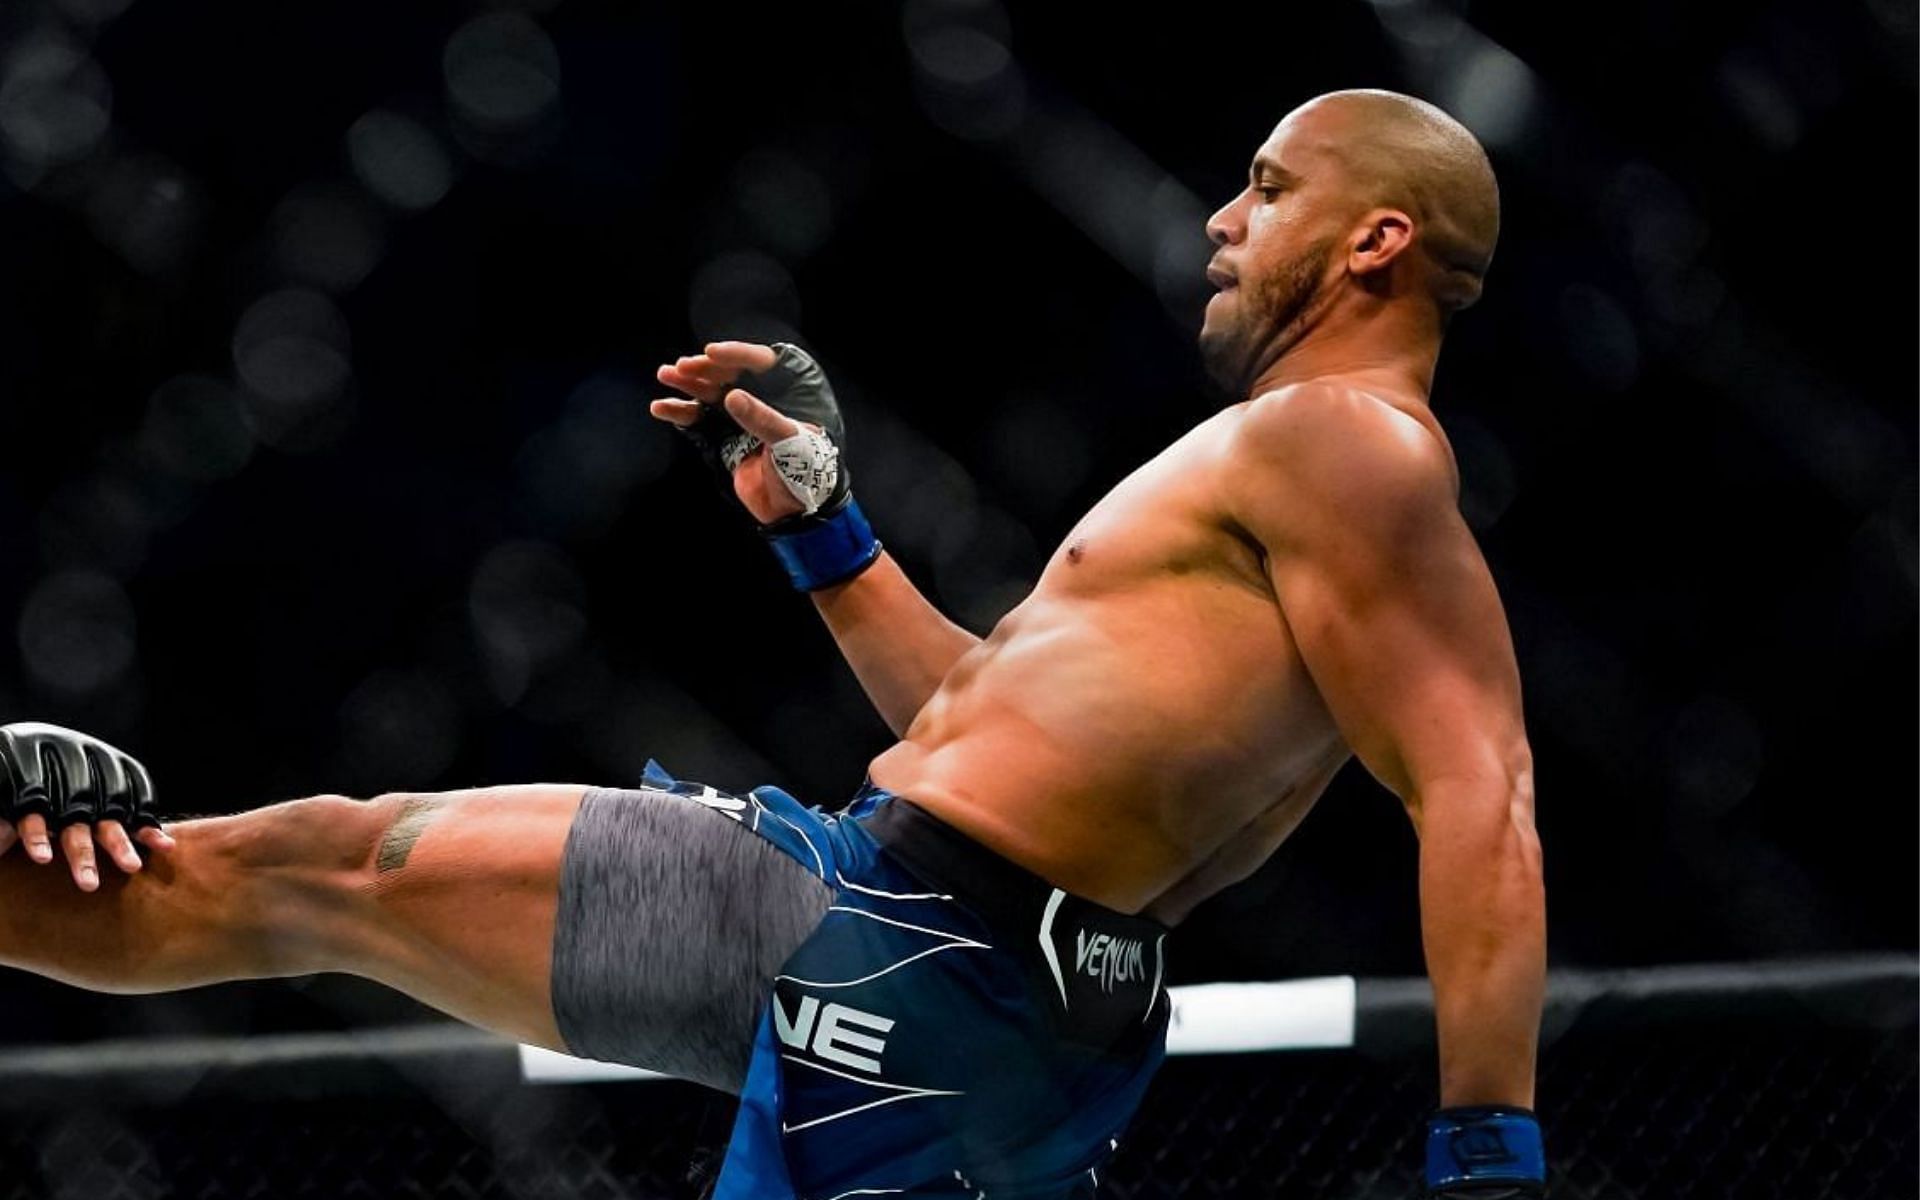 Ciryl Gane is in fine form as he prepares to take on Francis Ngannou at UFC 270 this weekend